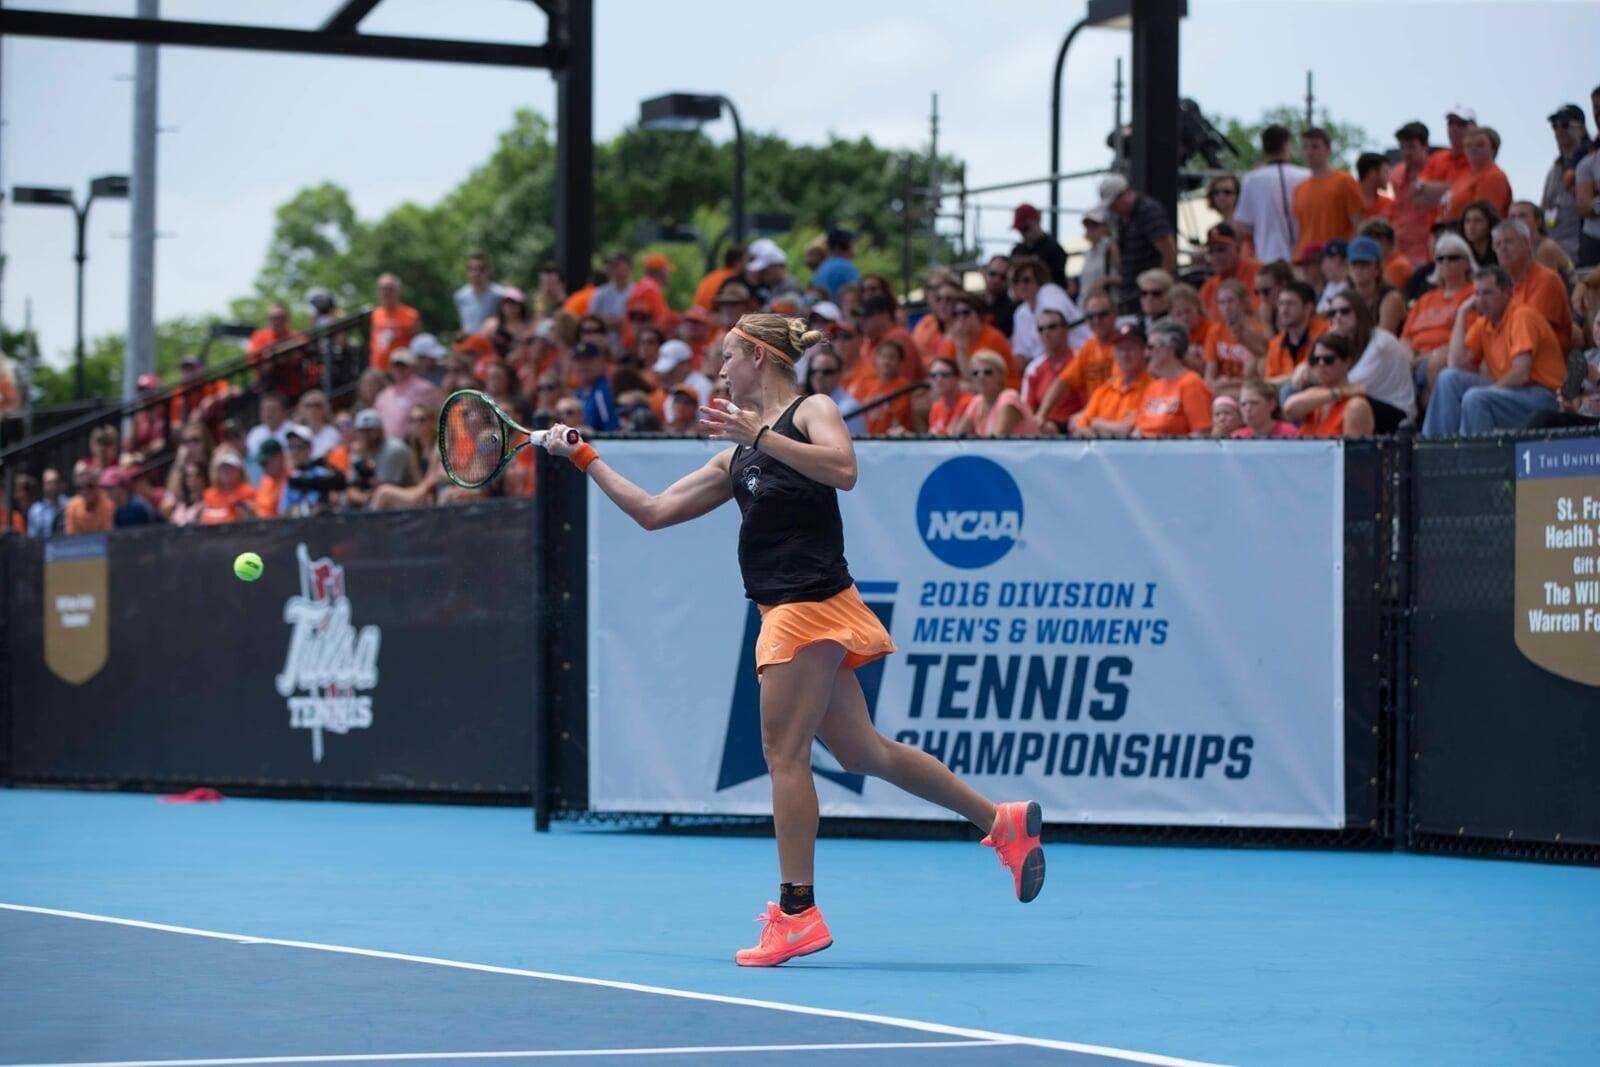 Female tennis player is hitting a forehand at the D1 national championships in 2016